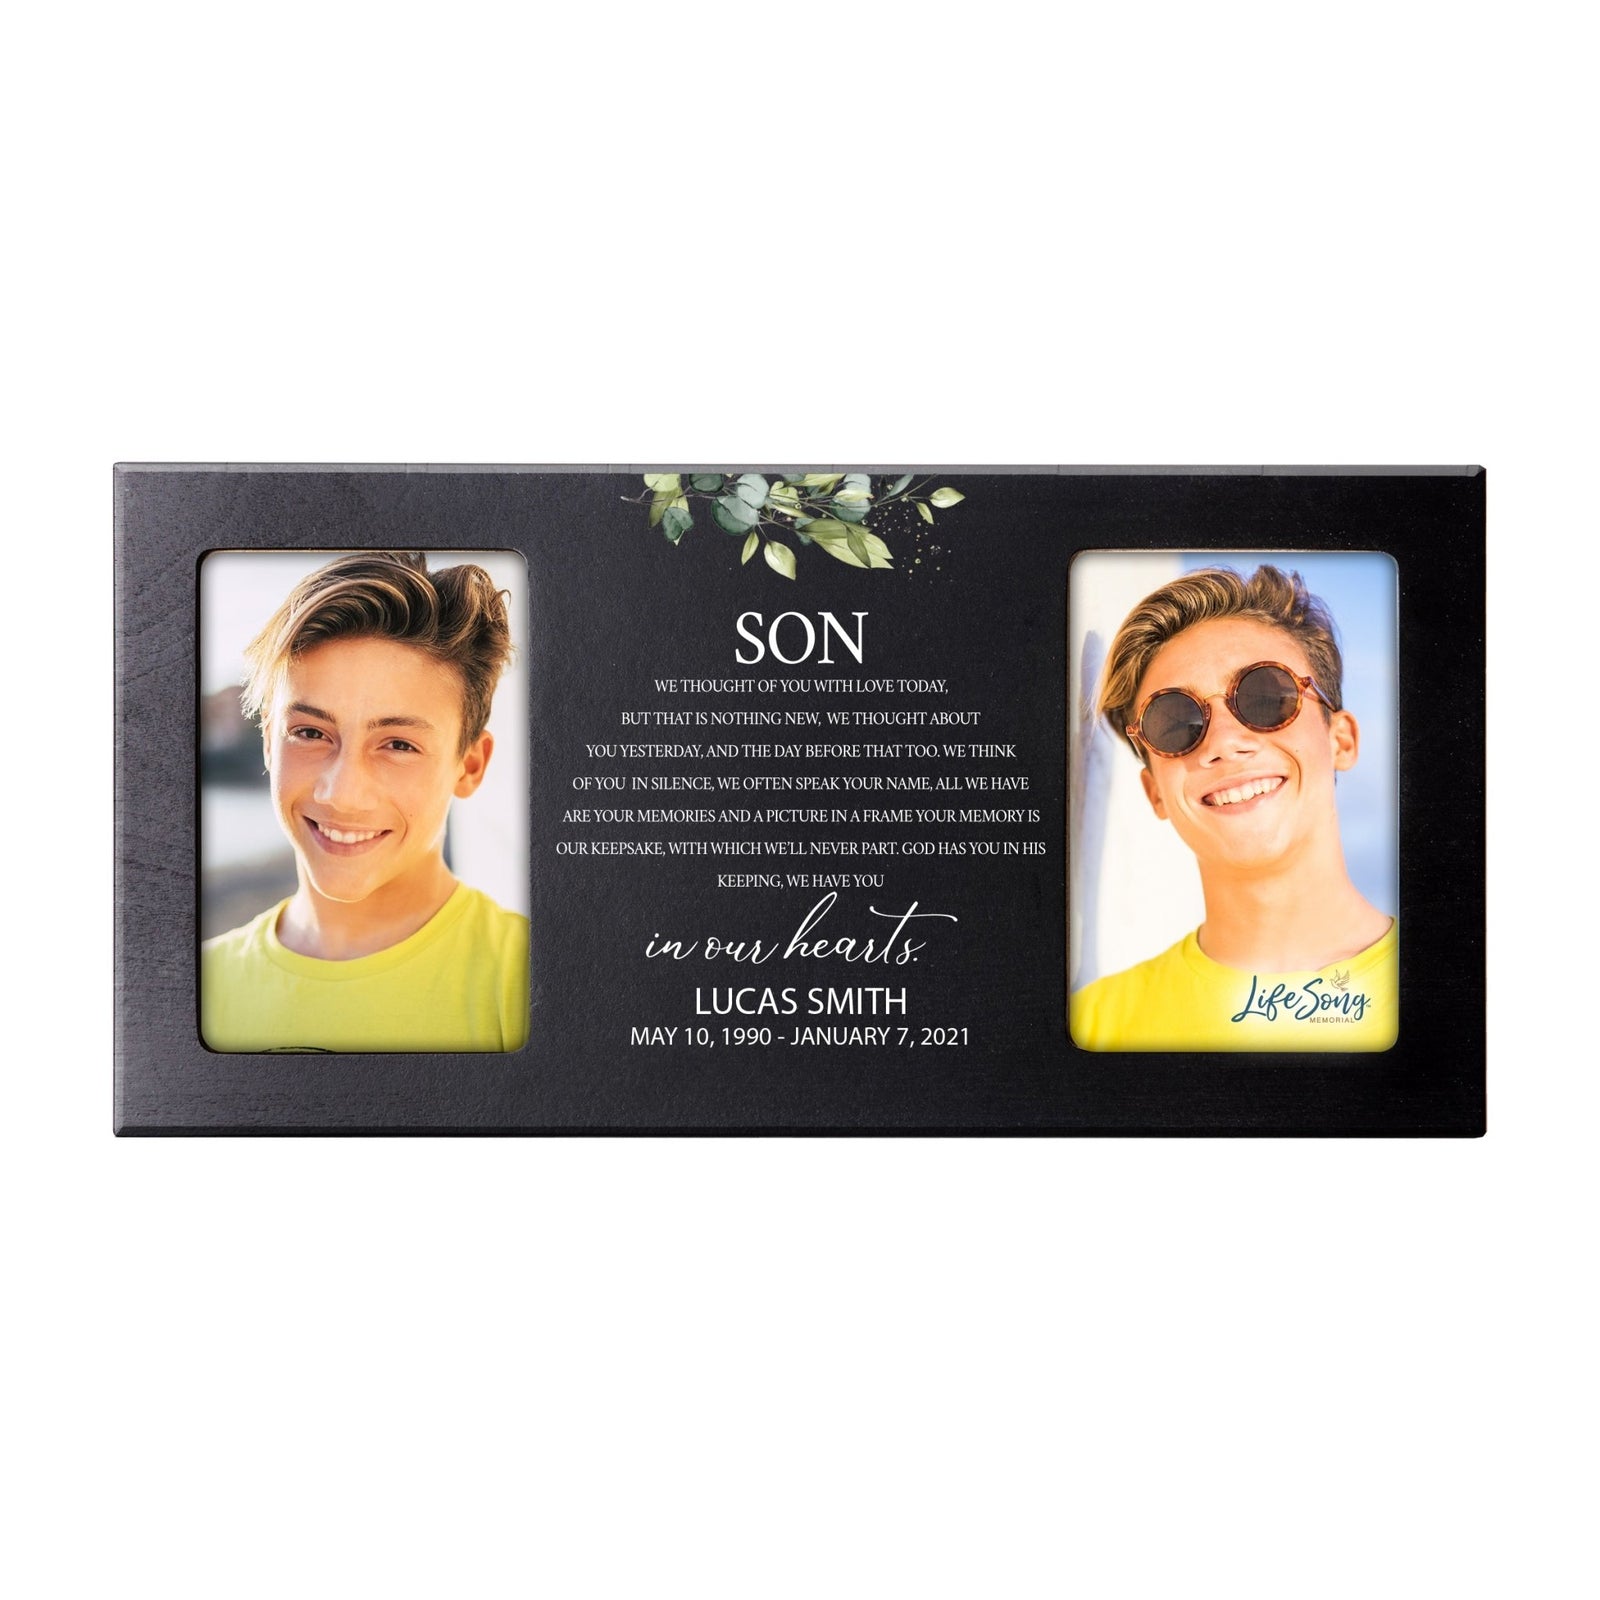 Custom Memorial Picture Frame 16x8in Holds Two 4x6in Photos - Son, We Thought Of You - LifeSong Milestones